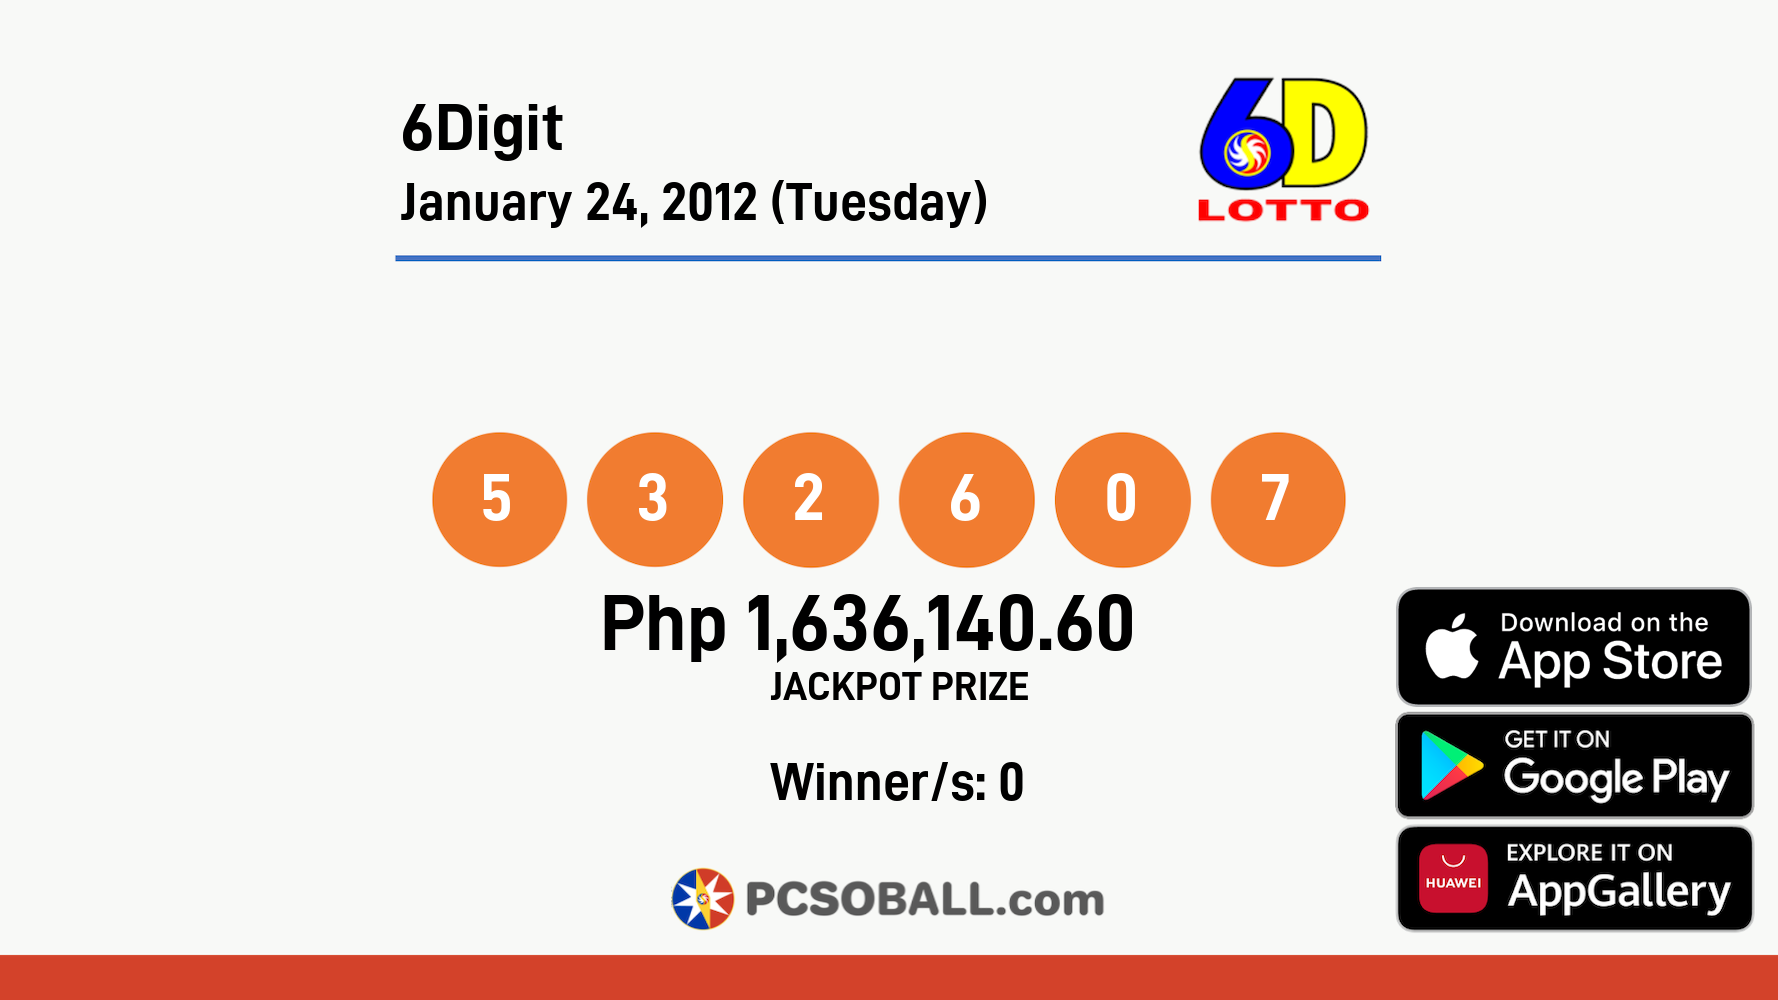 6Digit January 24, 2012 (Tuesday) Result